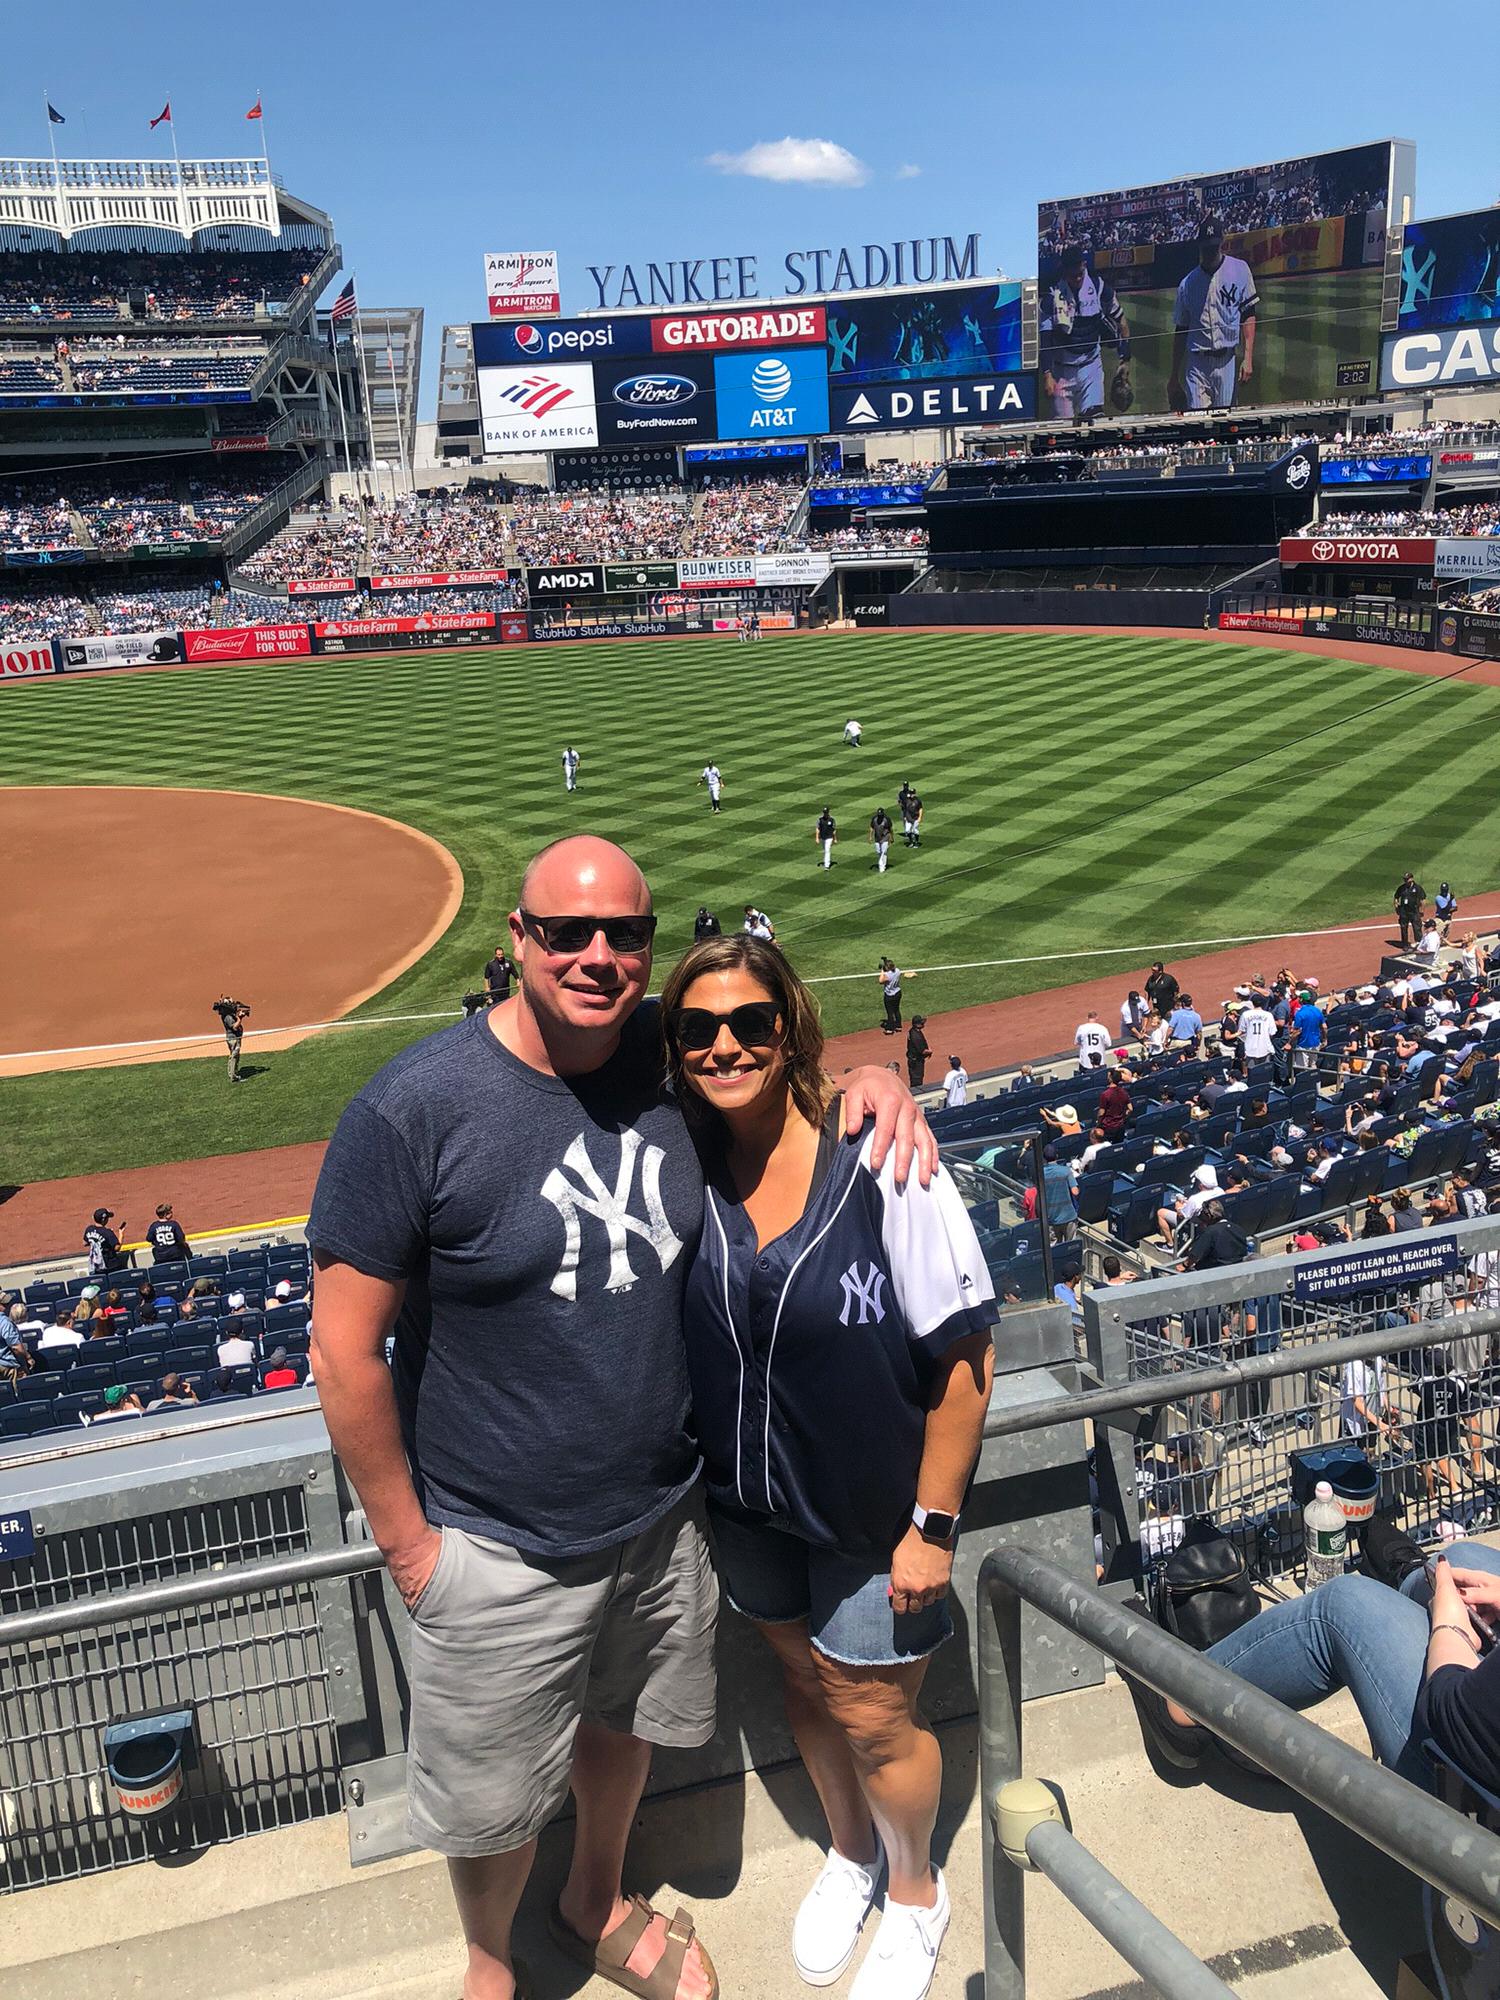 Amy's inaugural trip to Yankee Stadium. The Yanks lost to the Astros.